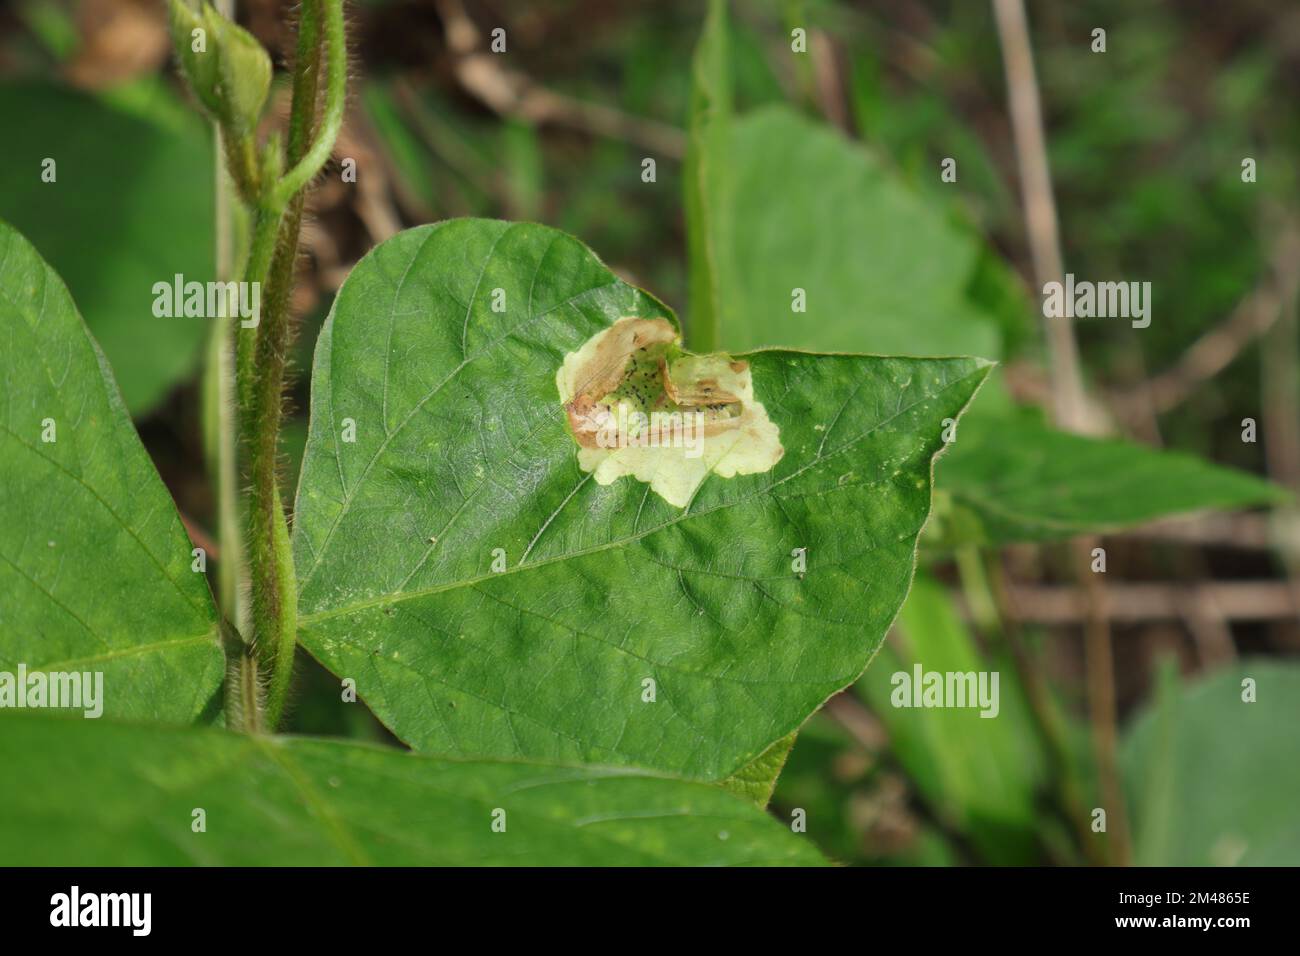 Close up view of a wild vine leaf infected with leaf spot disease Stock Photo